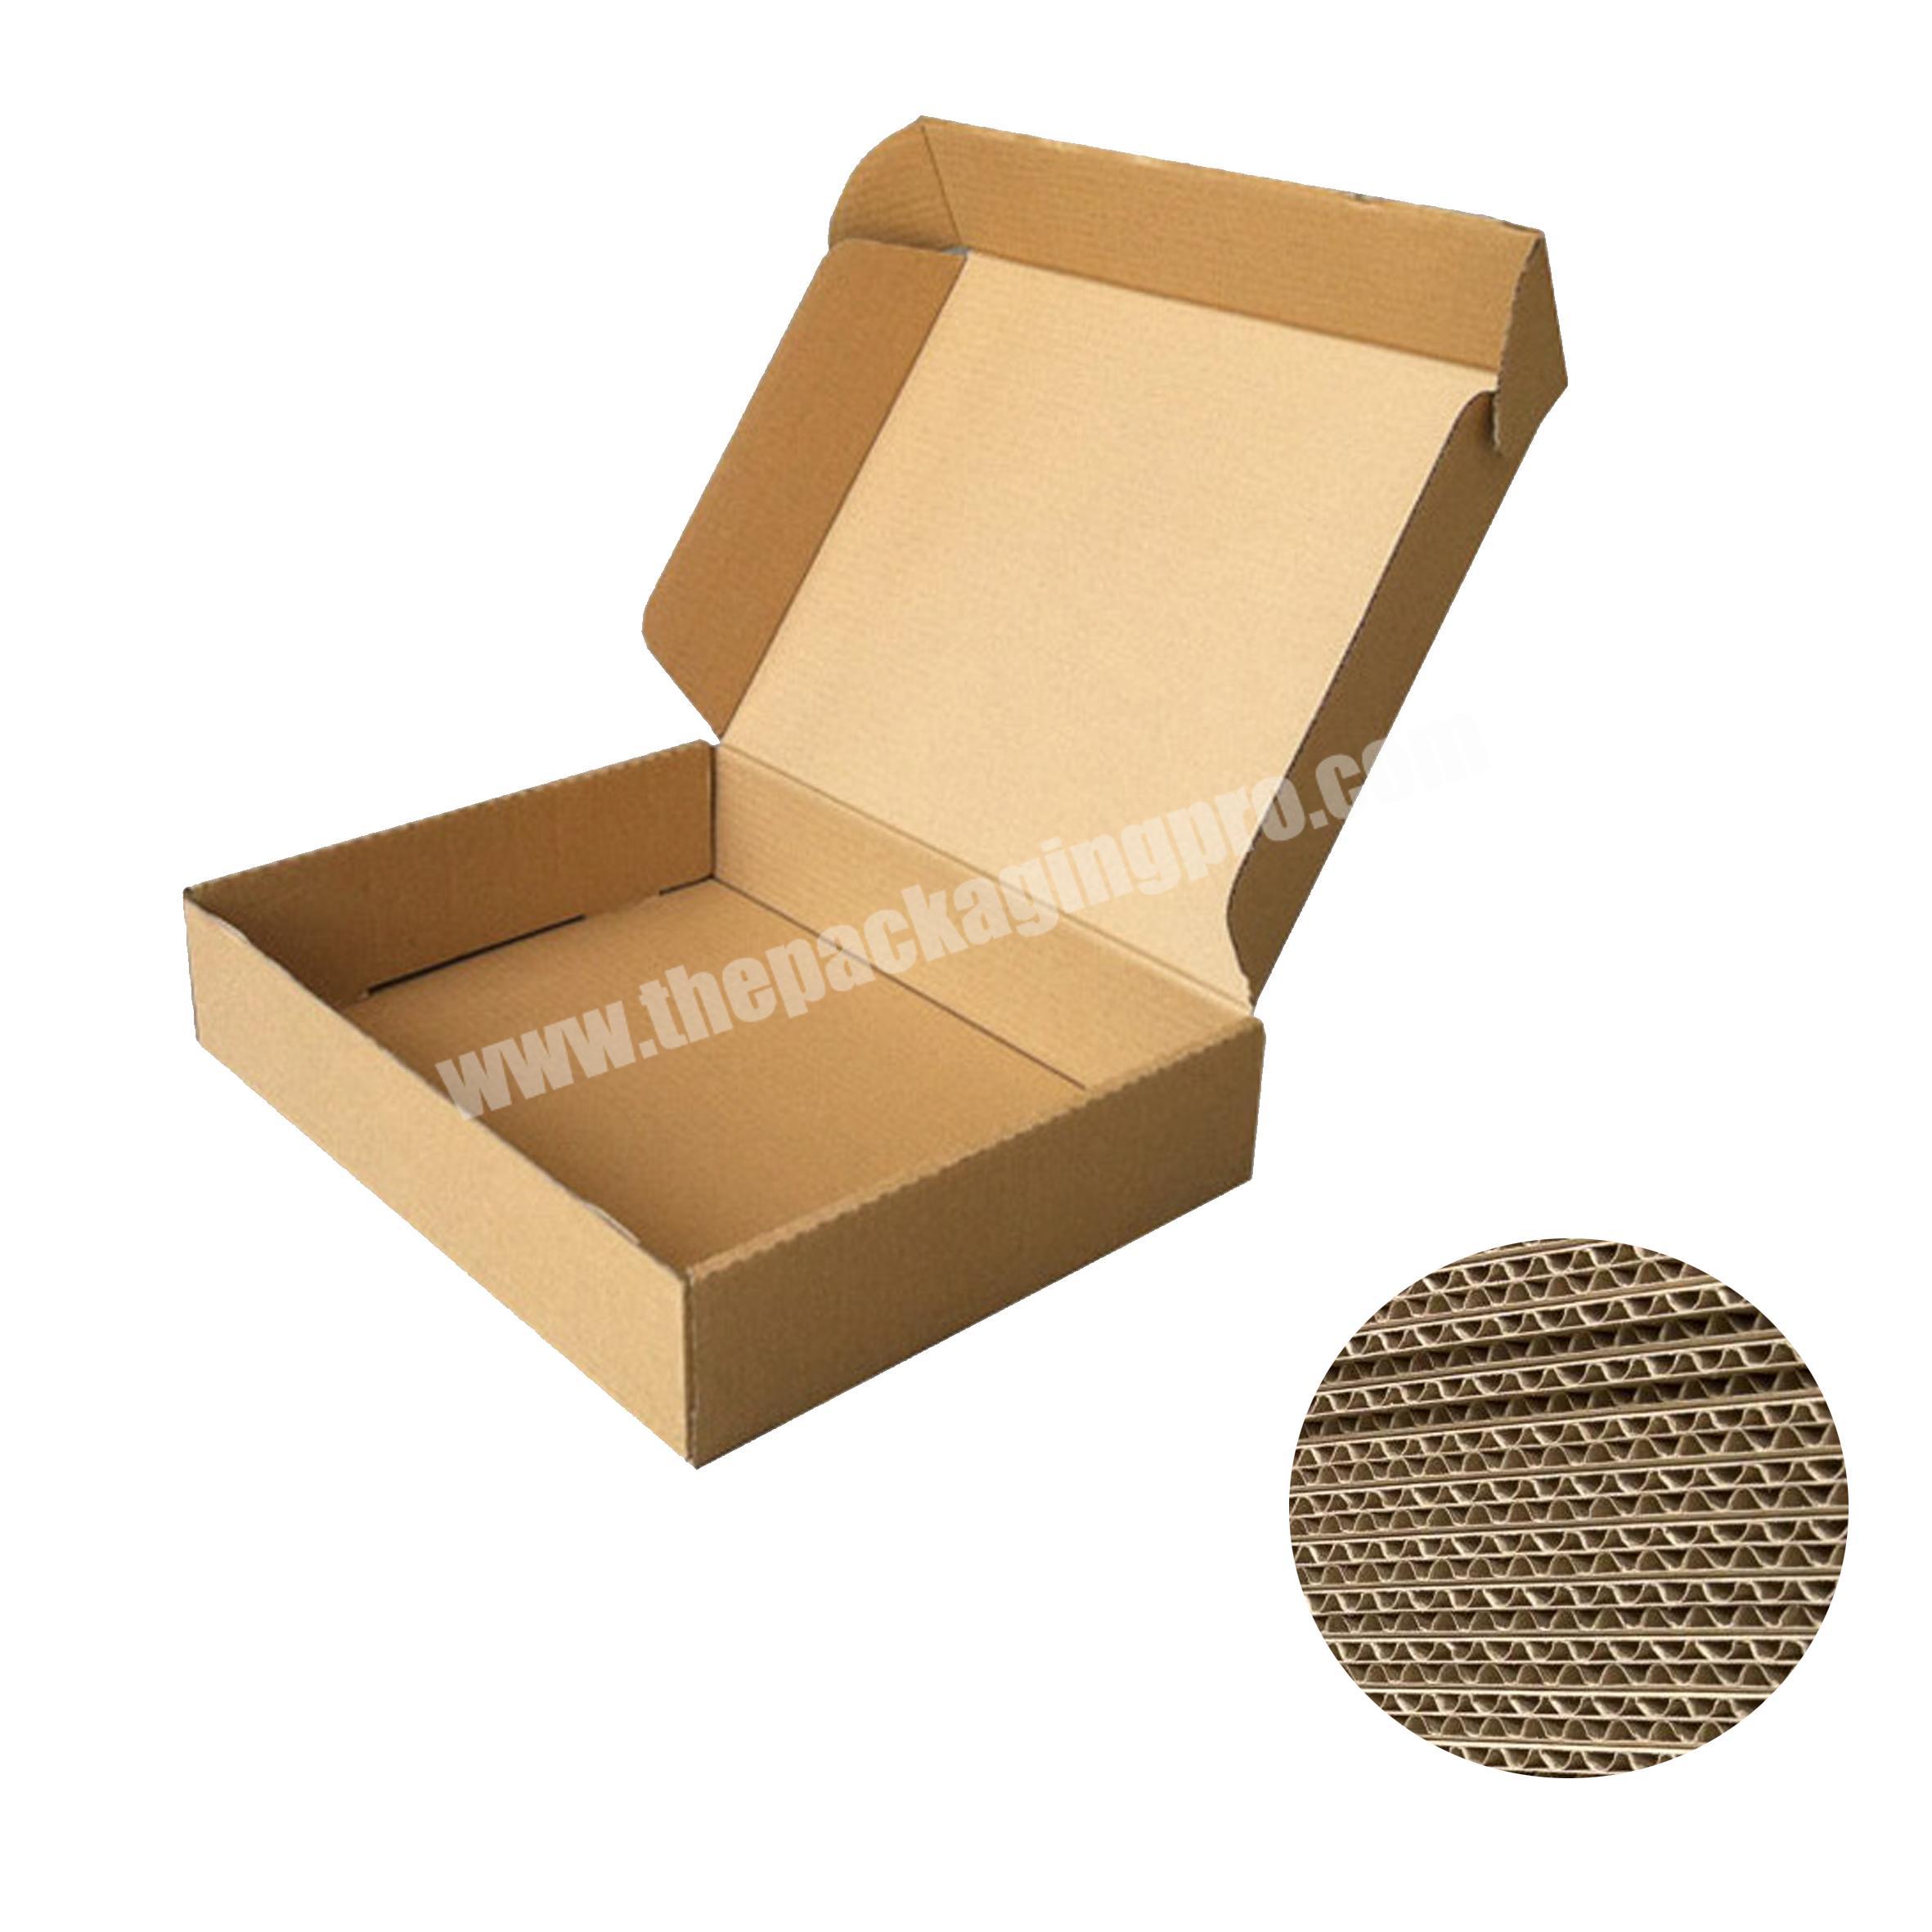 wholesale Printed logo recyclable Corrugated Cardboard Shipping Boxes